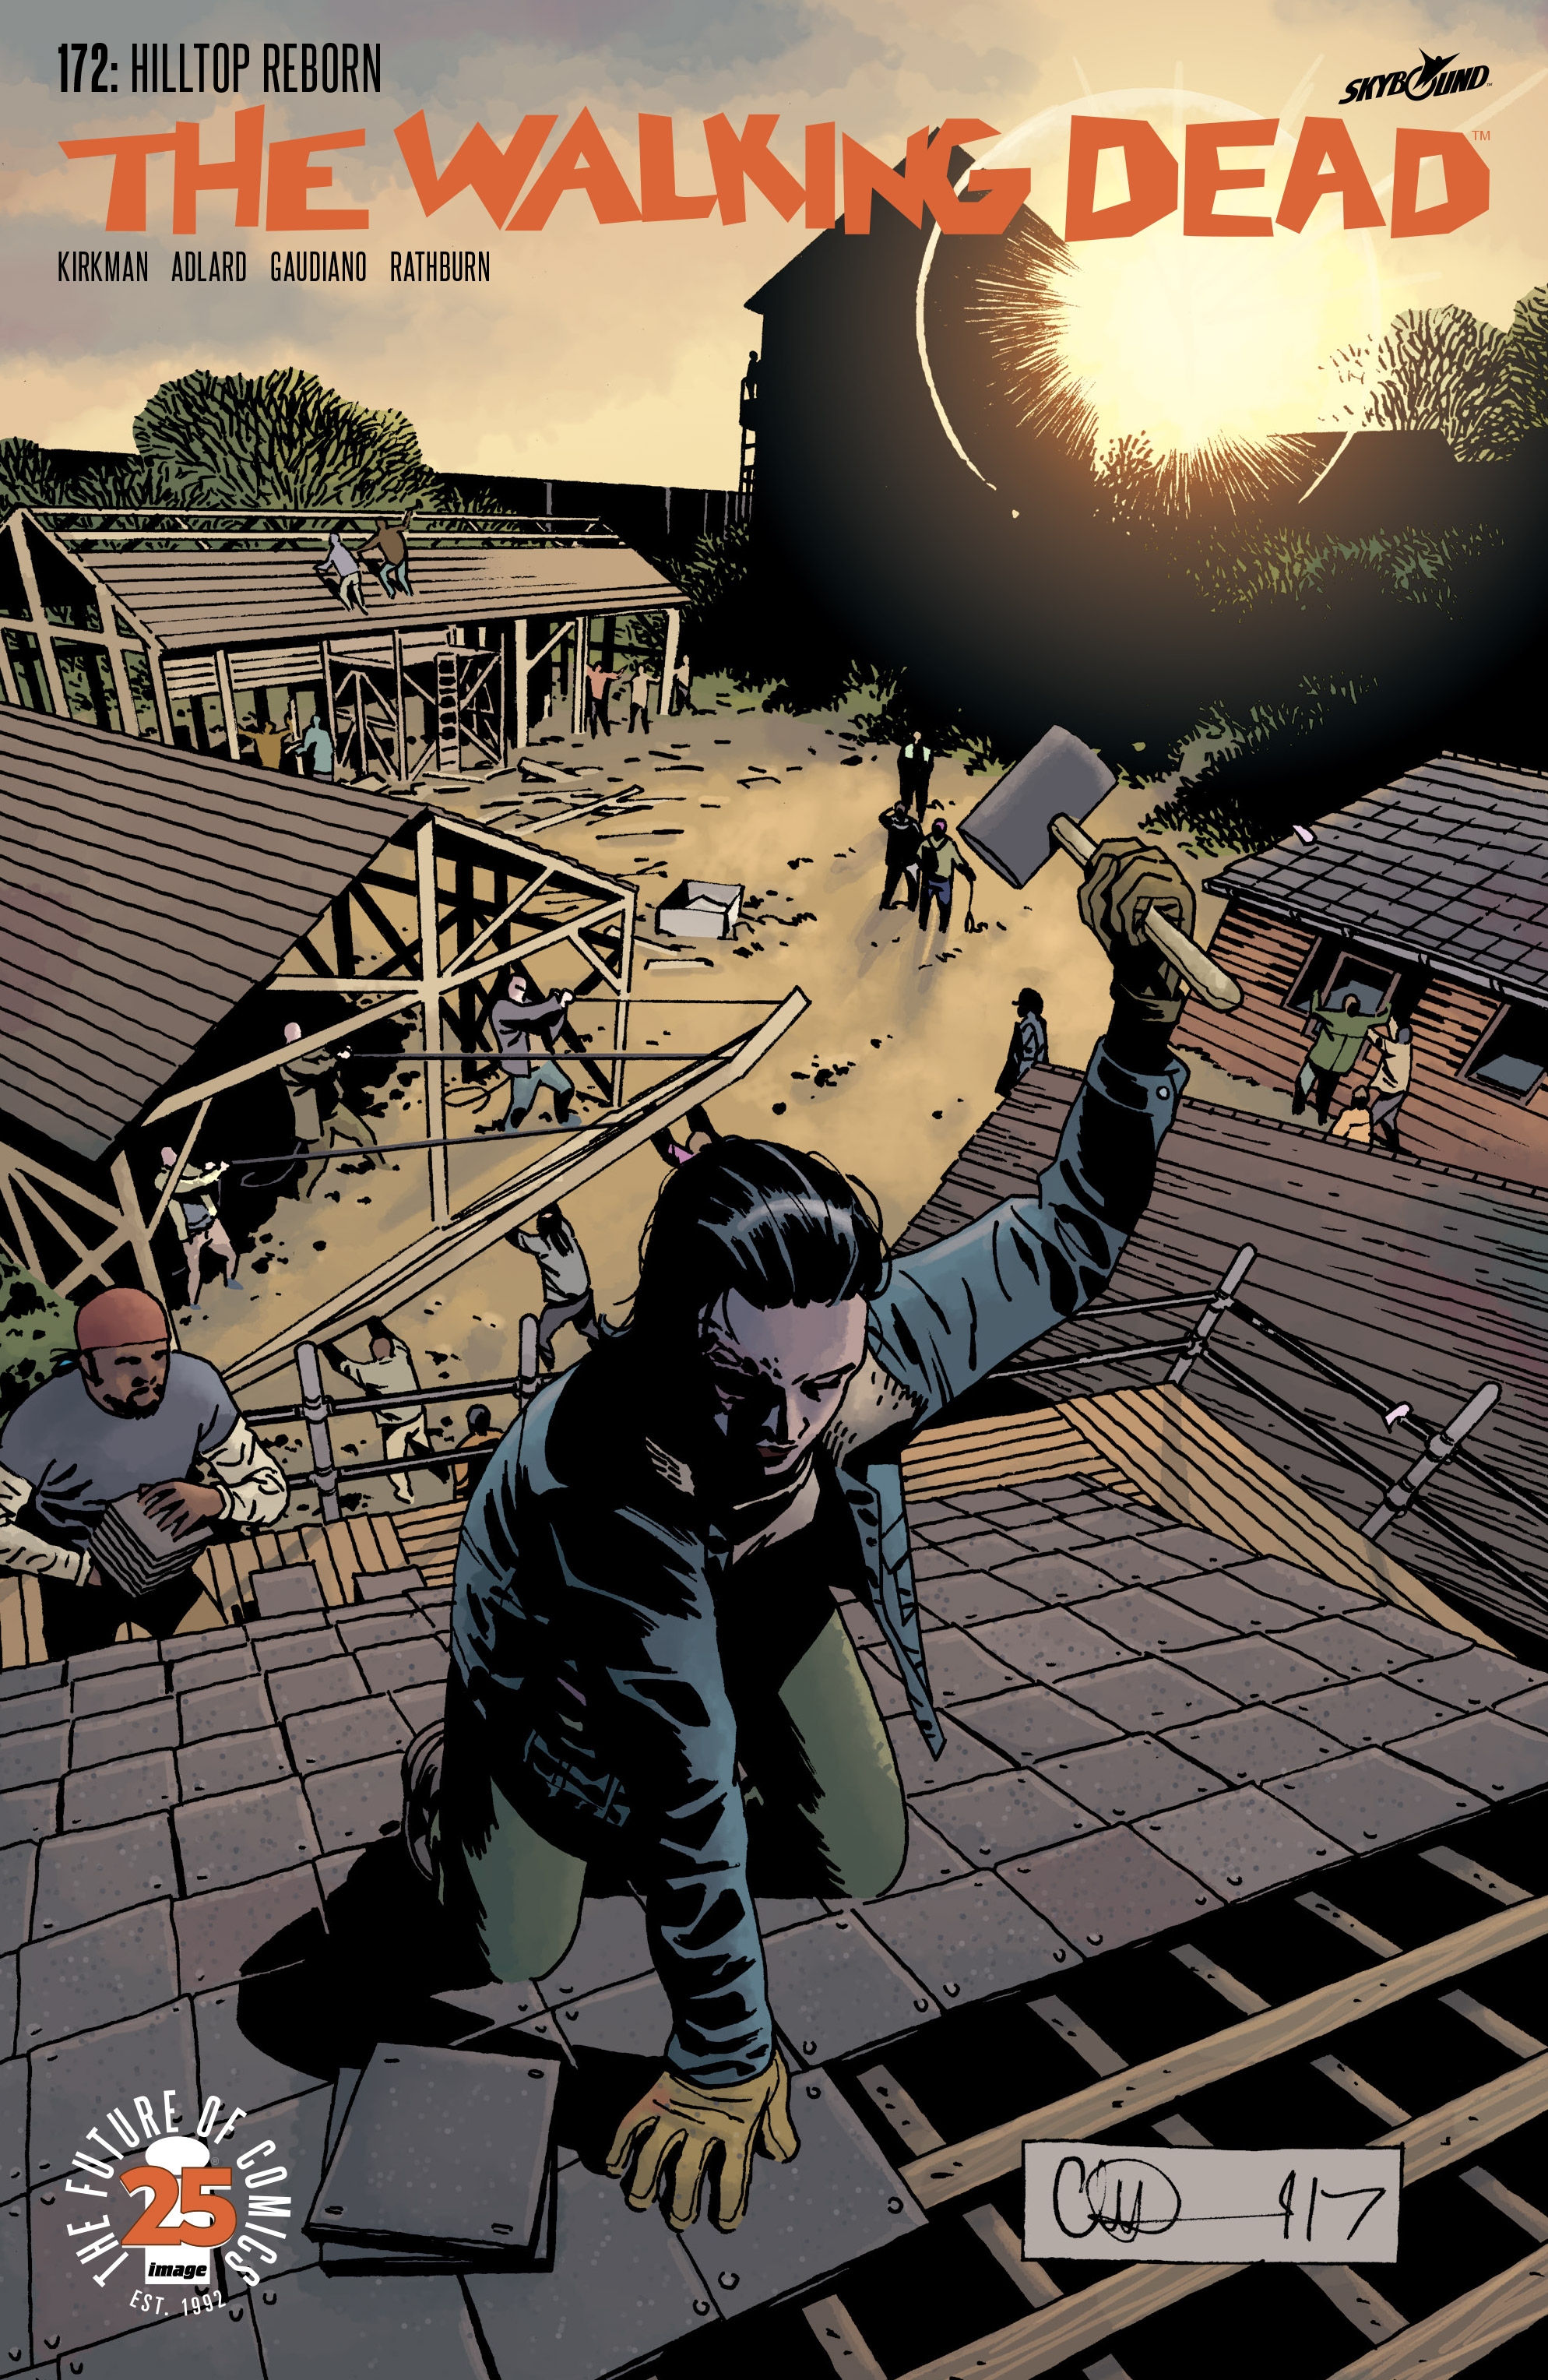 The Walking Dead (2003-): Chapter 172 - Page 1